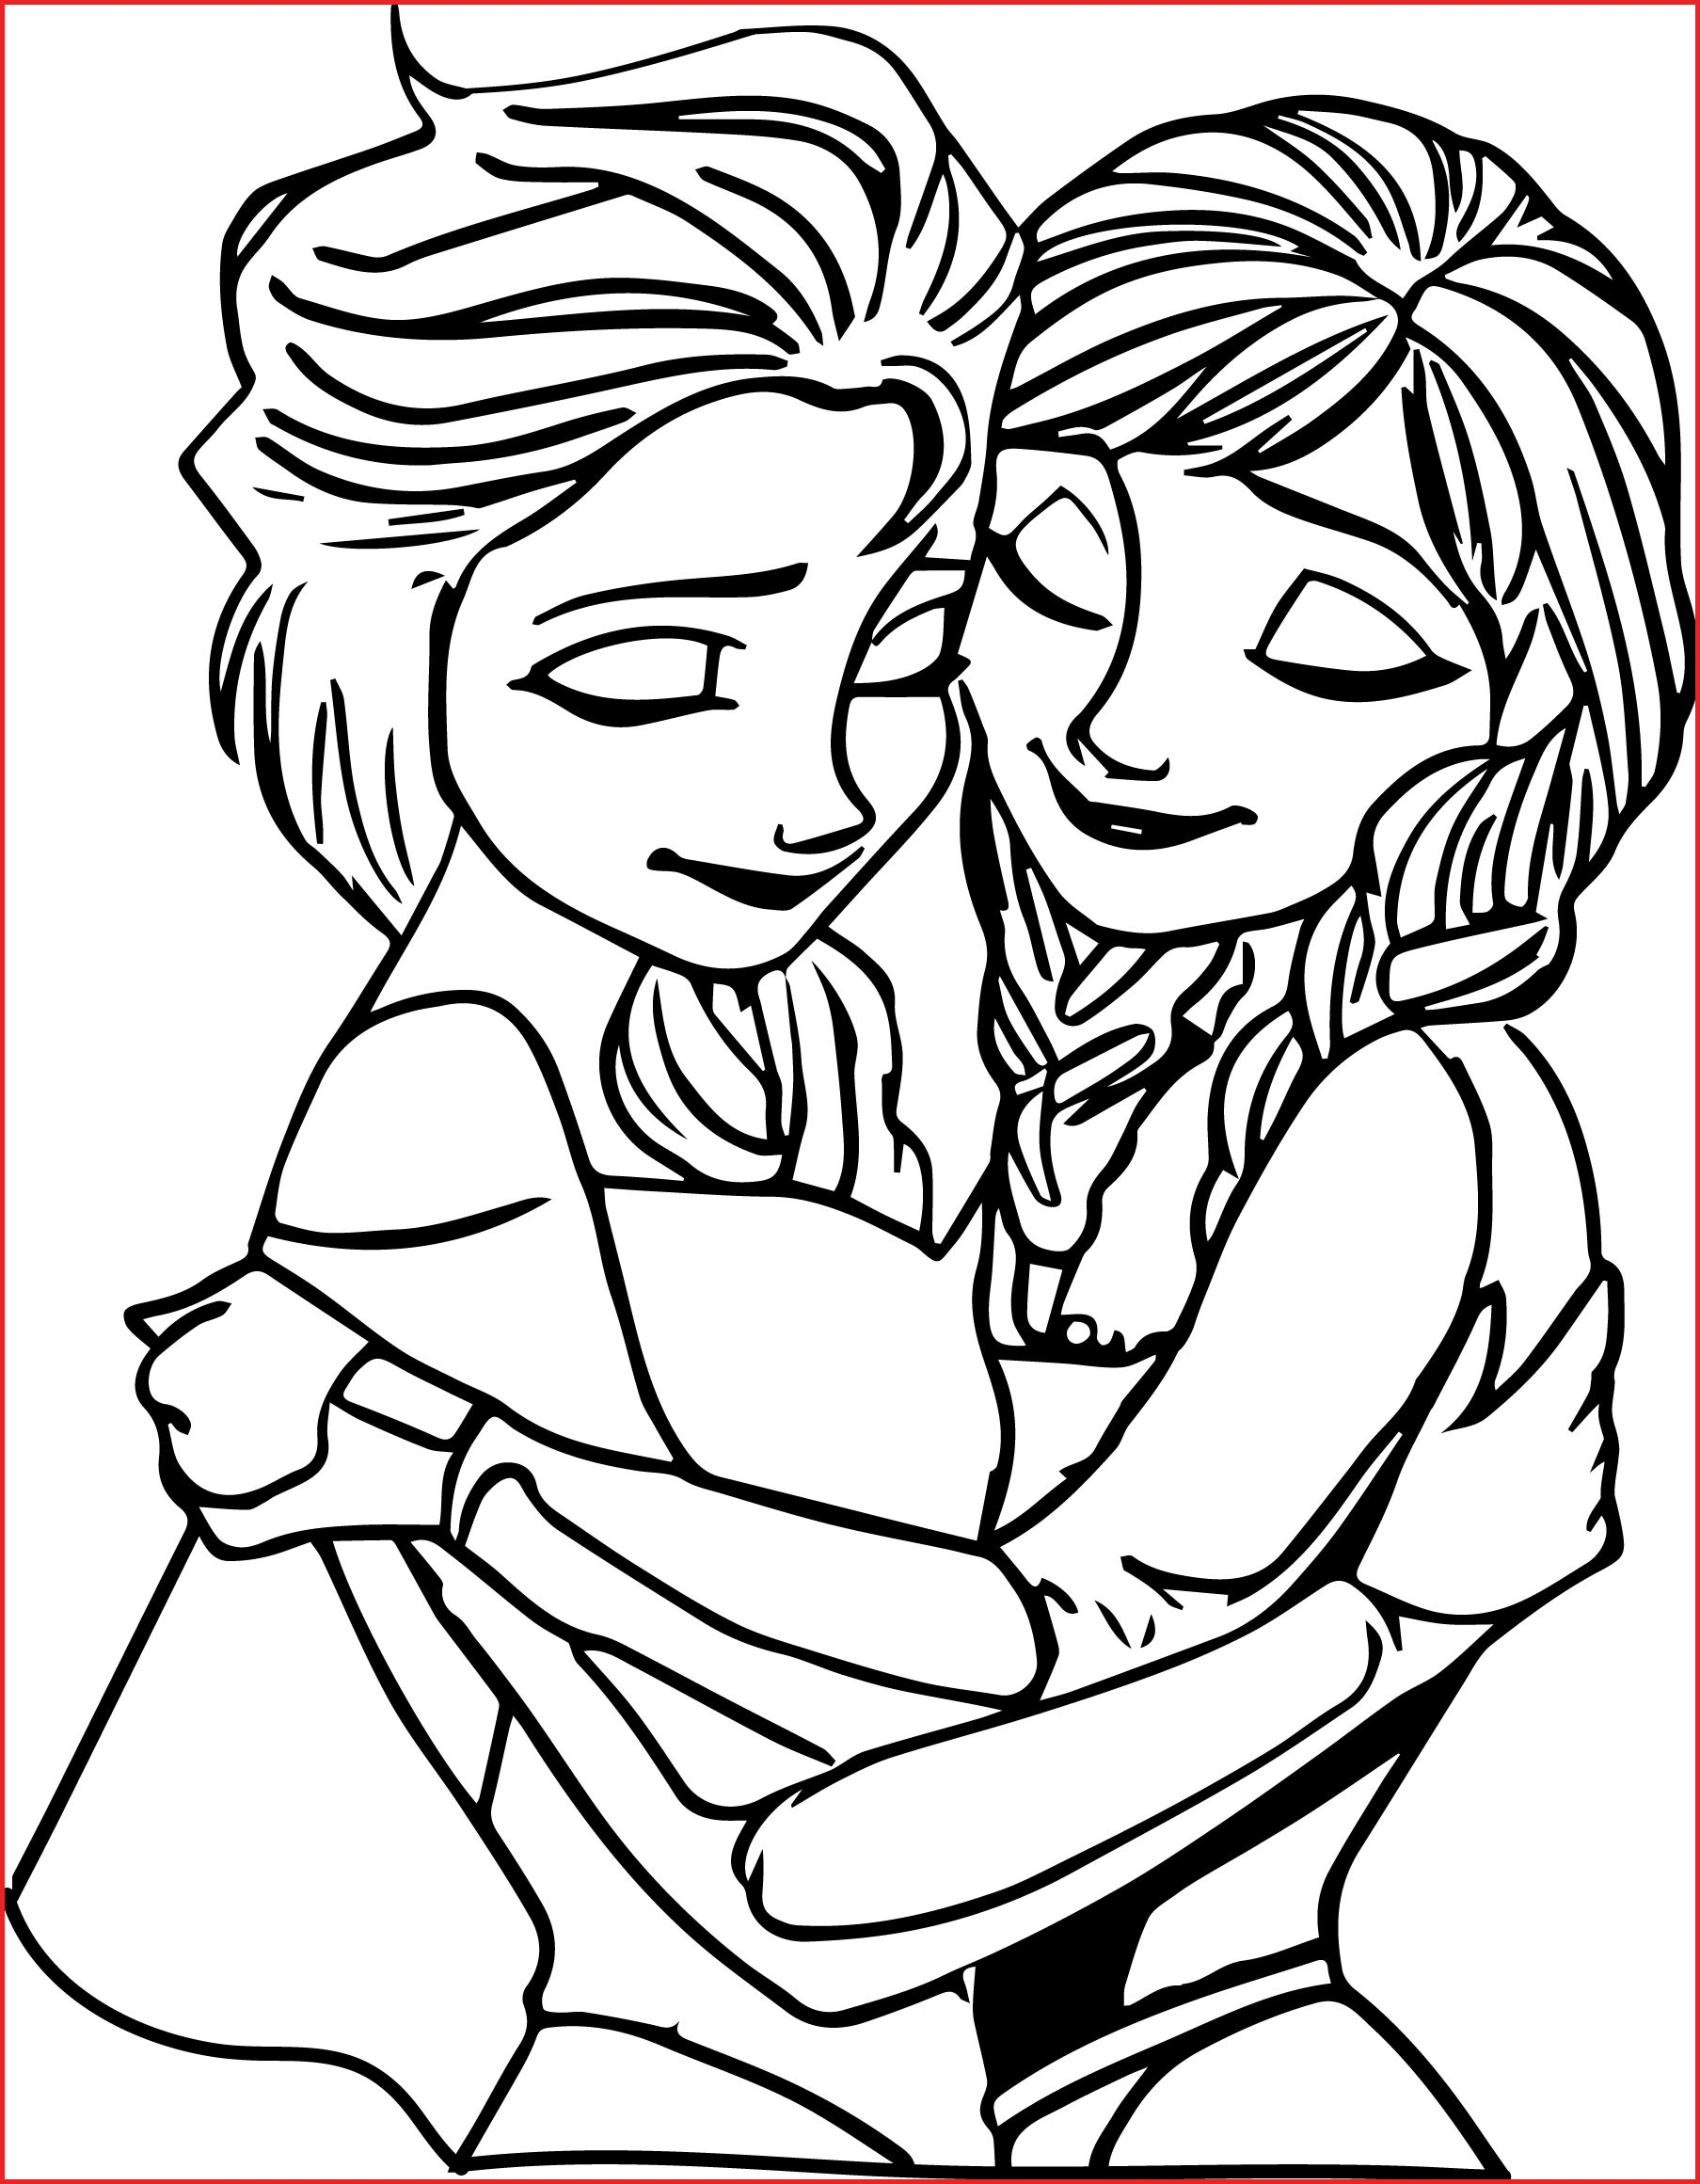 Coloring Pages For Girls Frozen Coloring Ideas Elsadna Games For Girls To Play Disney Free Frozen